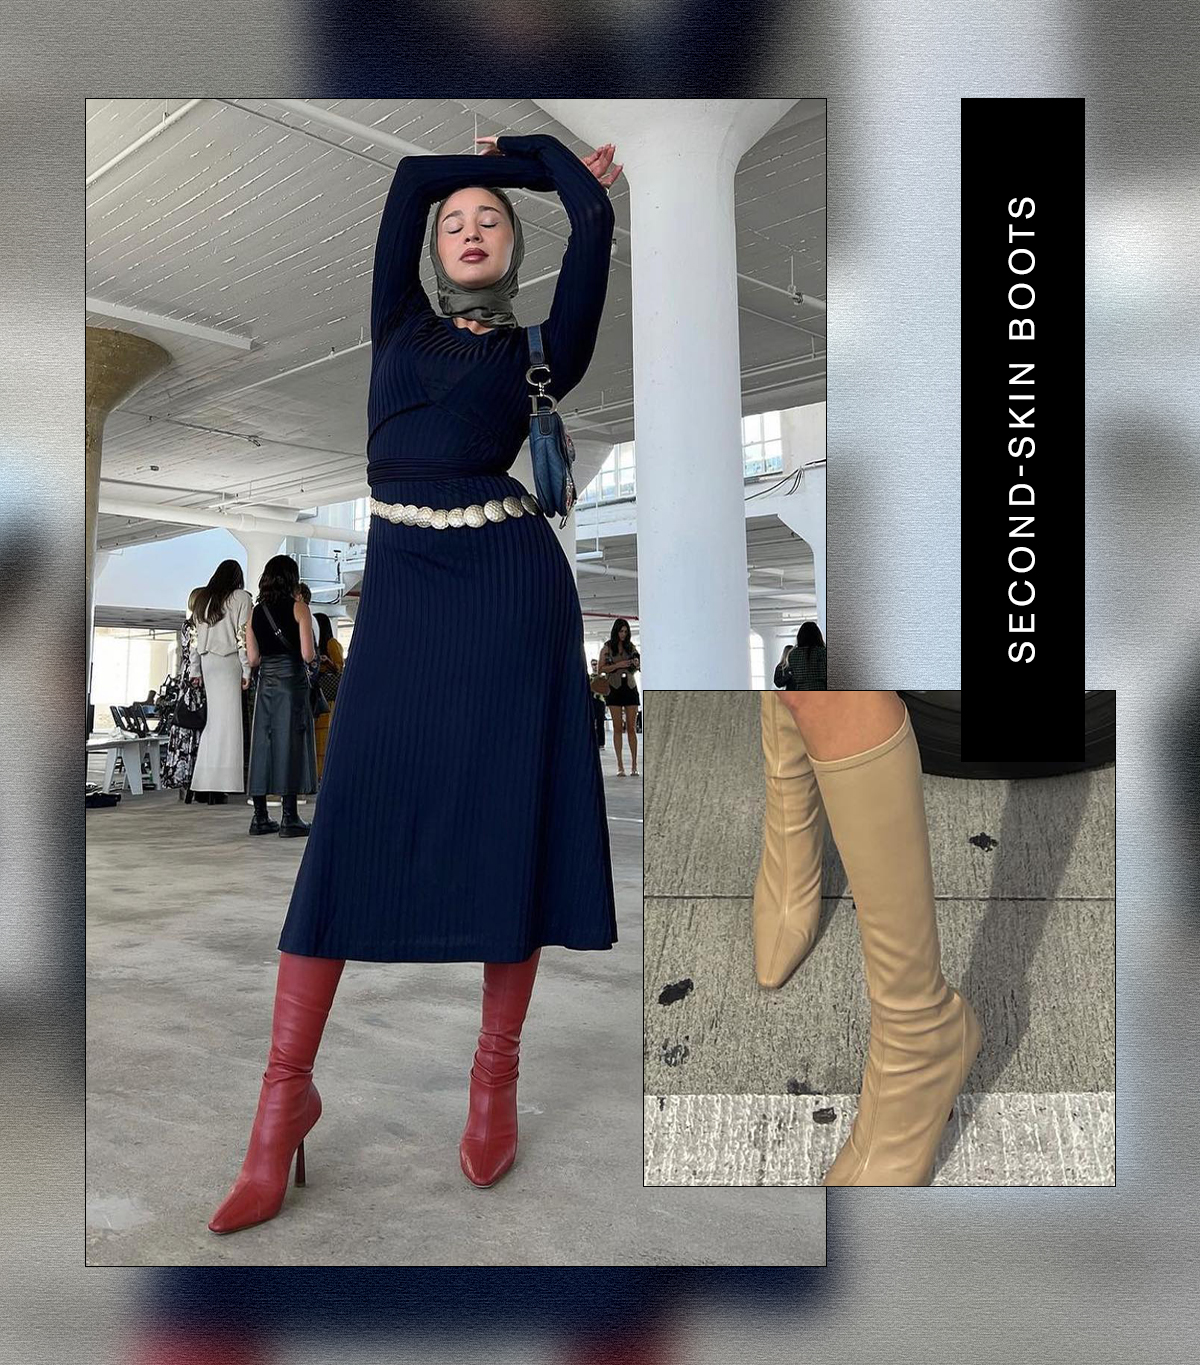 She Creates Stories : The 5 Footwear Trends for Spring Summer 2023